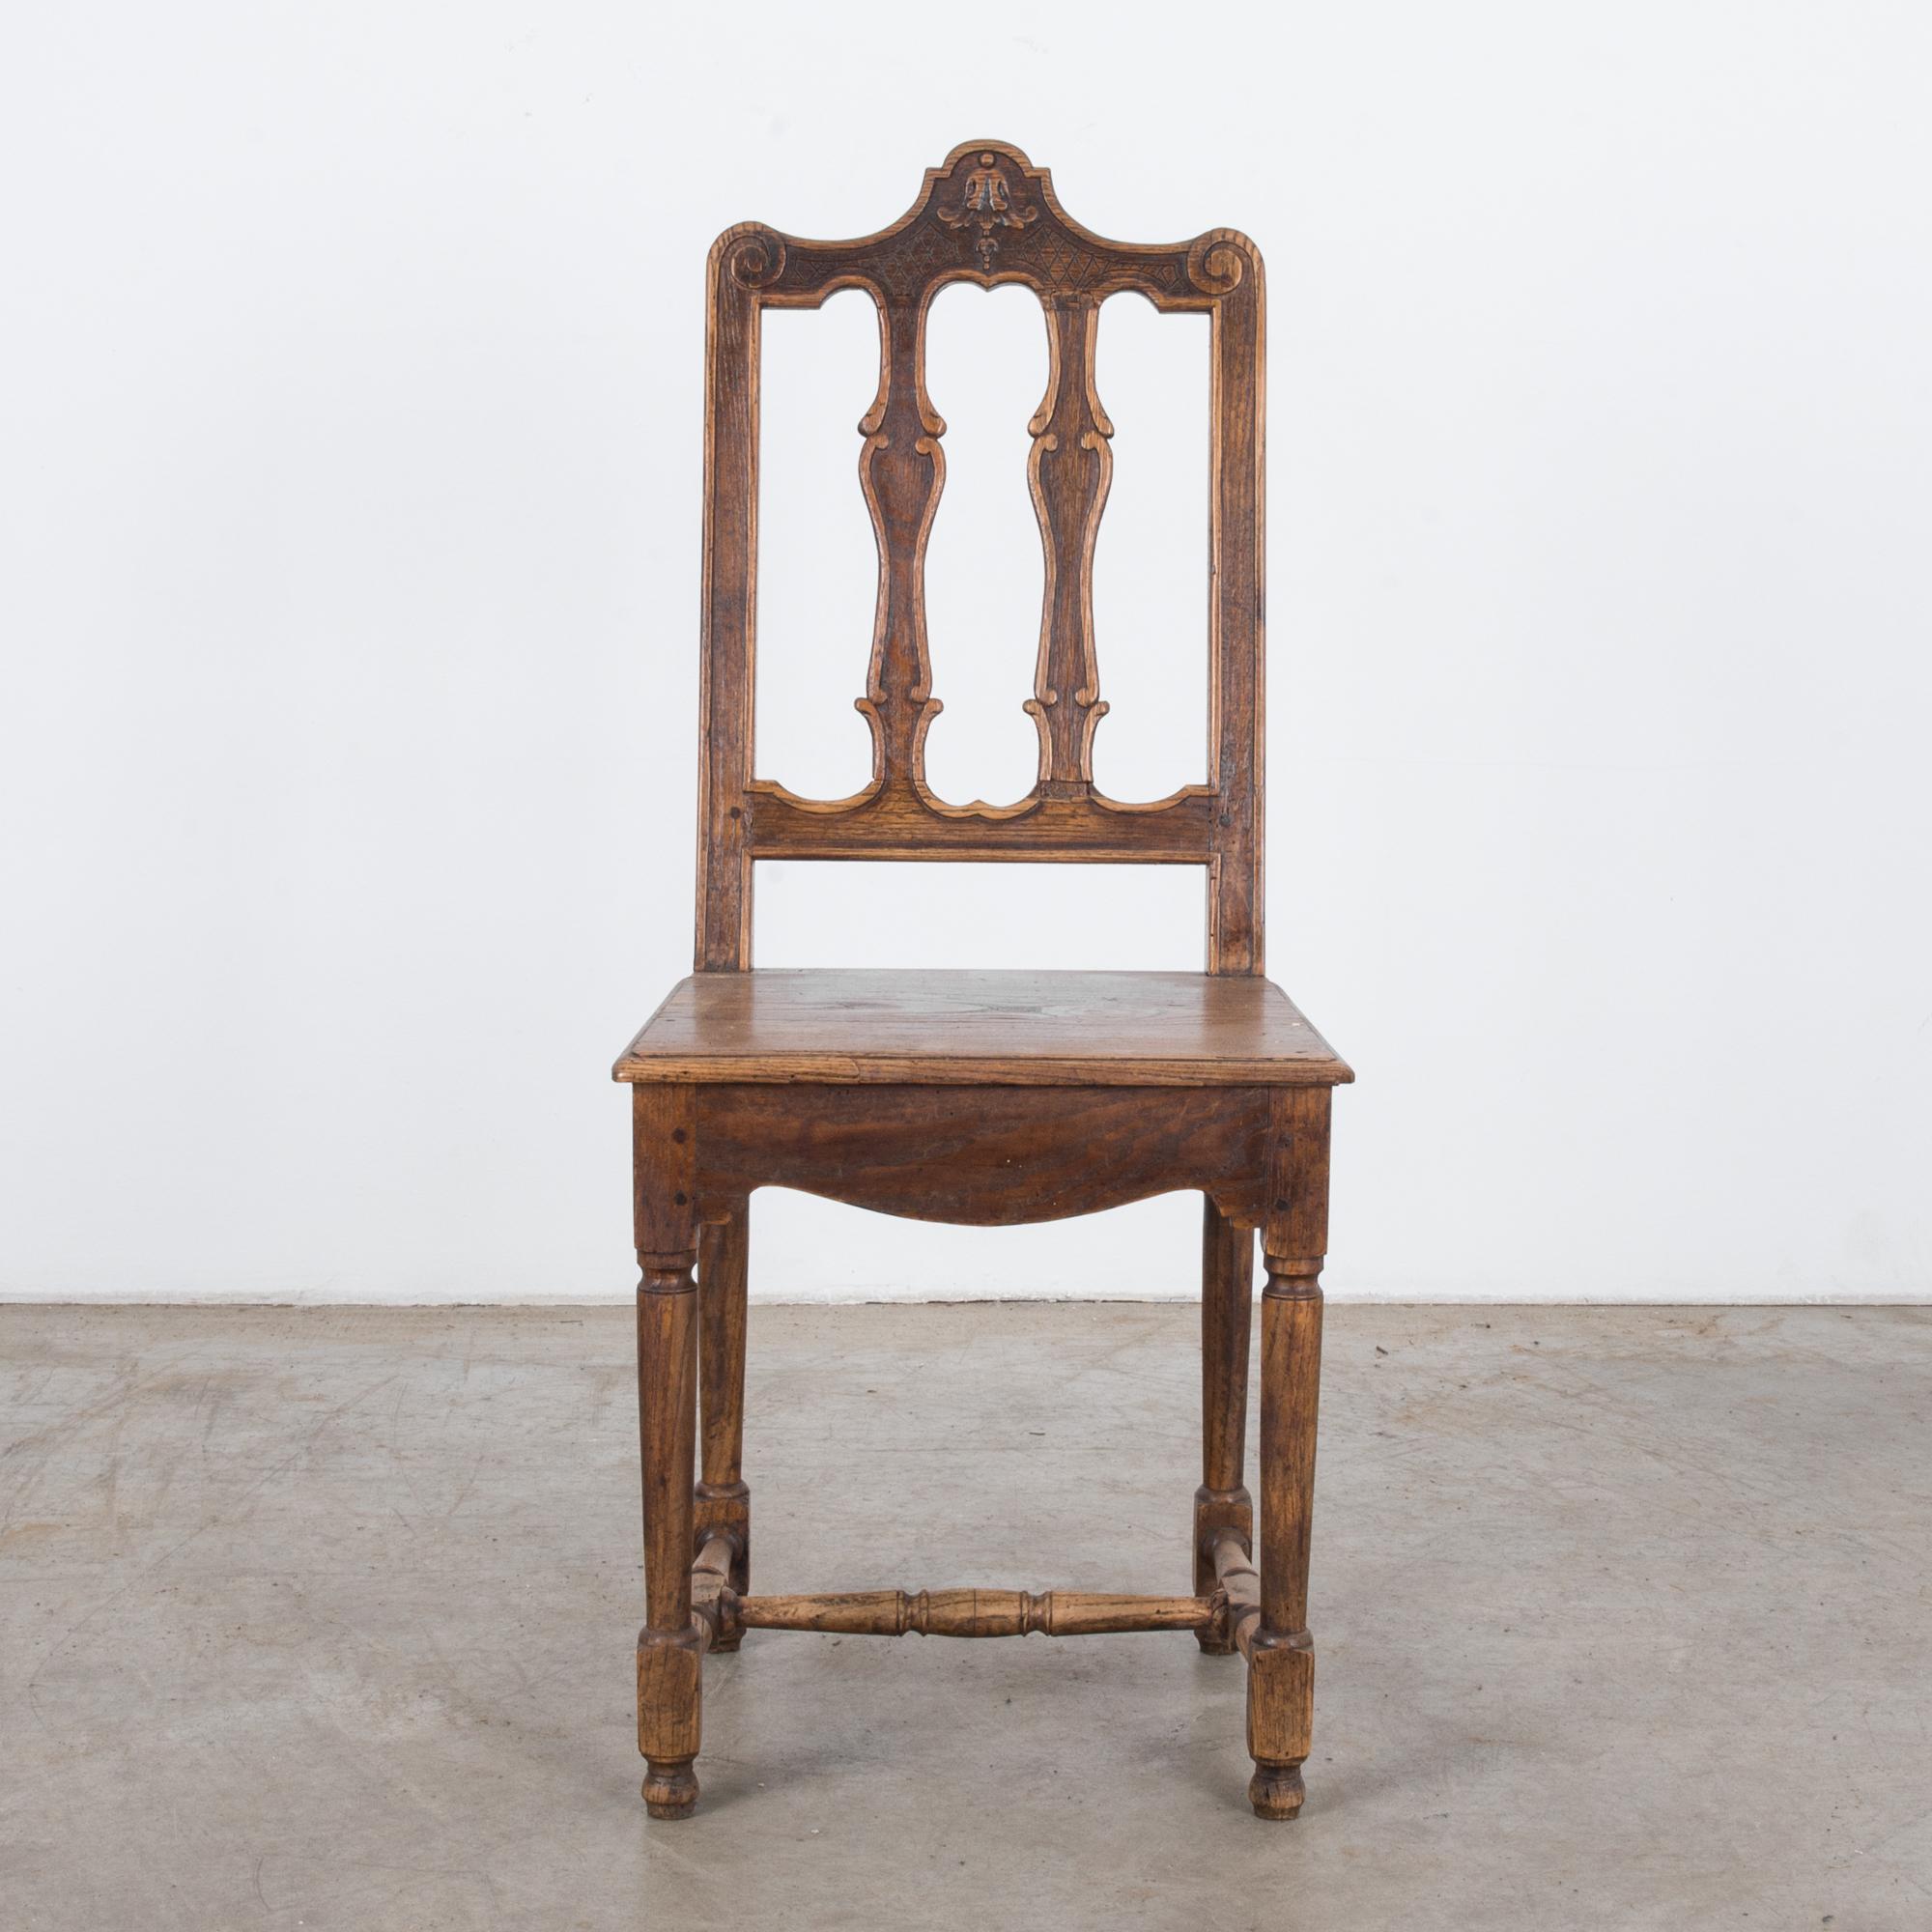 A carved wooden chair from Belgium, circa 1900. An upright form with a simple seat and elegant backrest. Turned legs joined by a strut support a deep, curved apron. The slats of the backrest are carved into fluid lines; the top rises into a